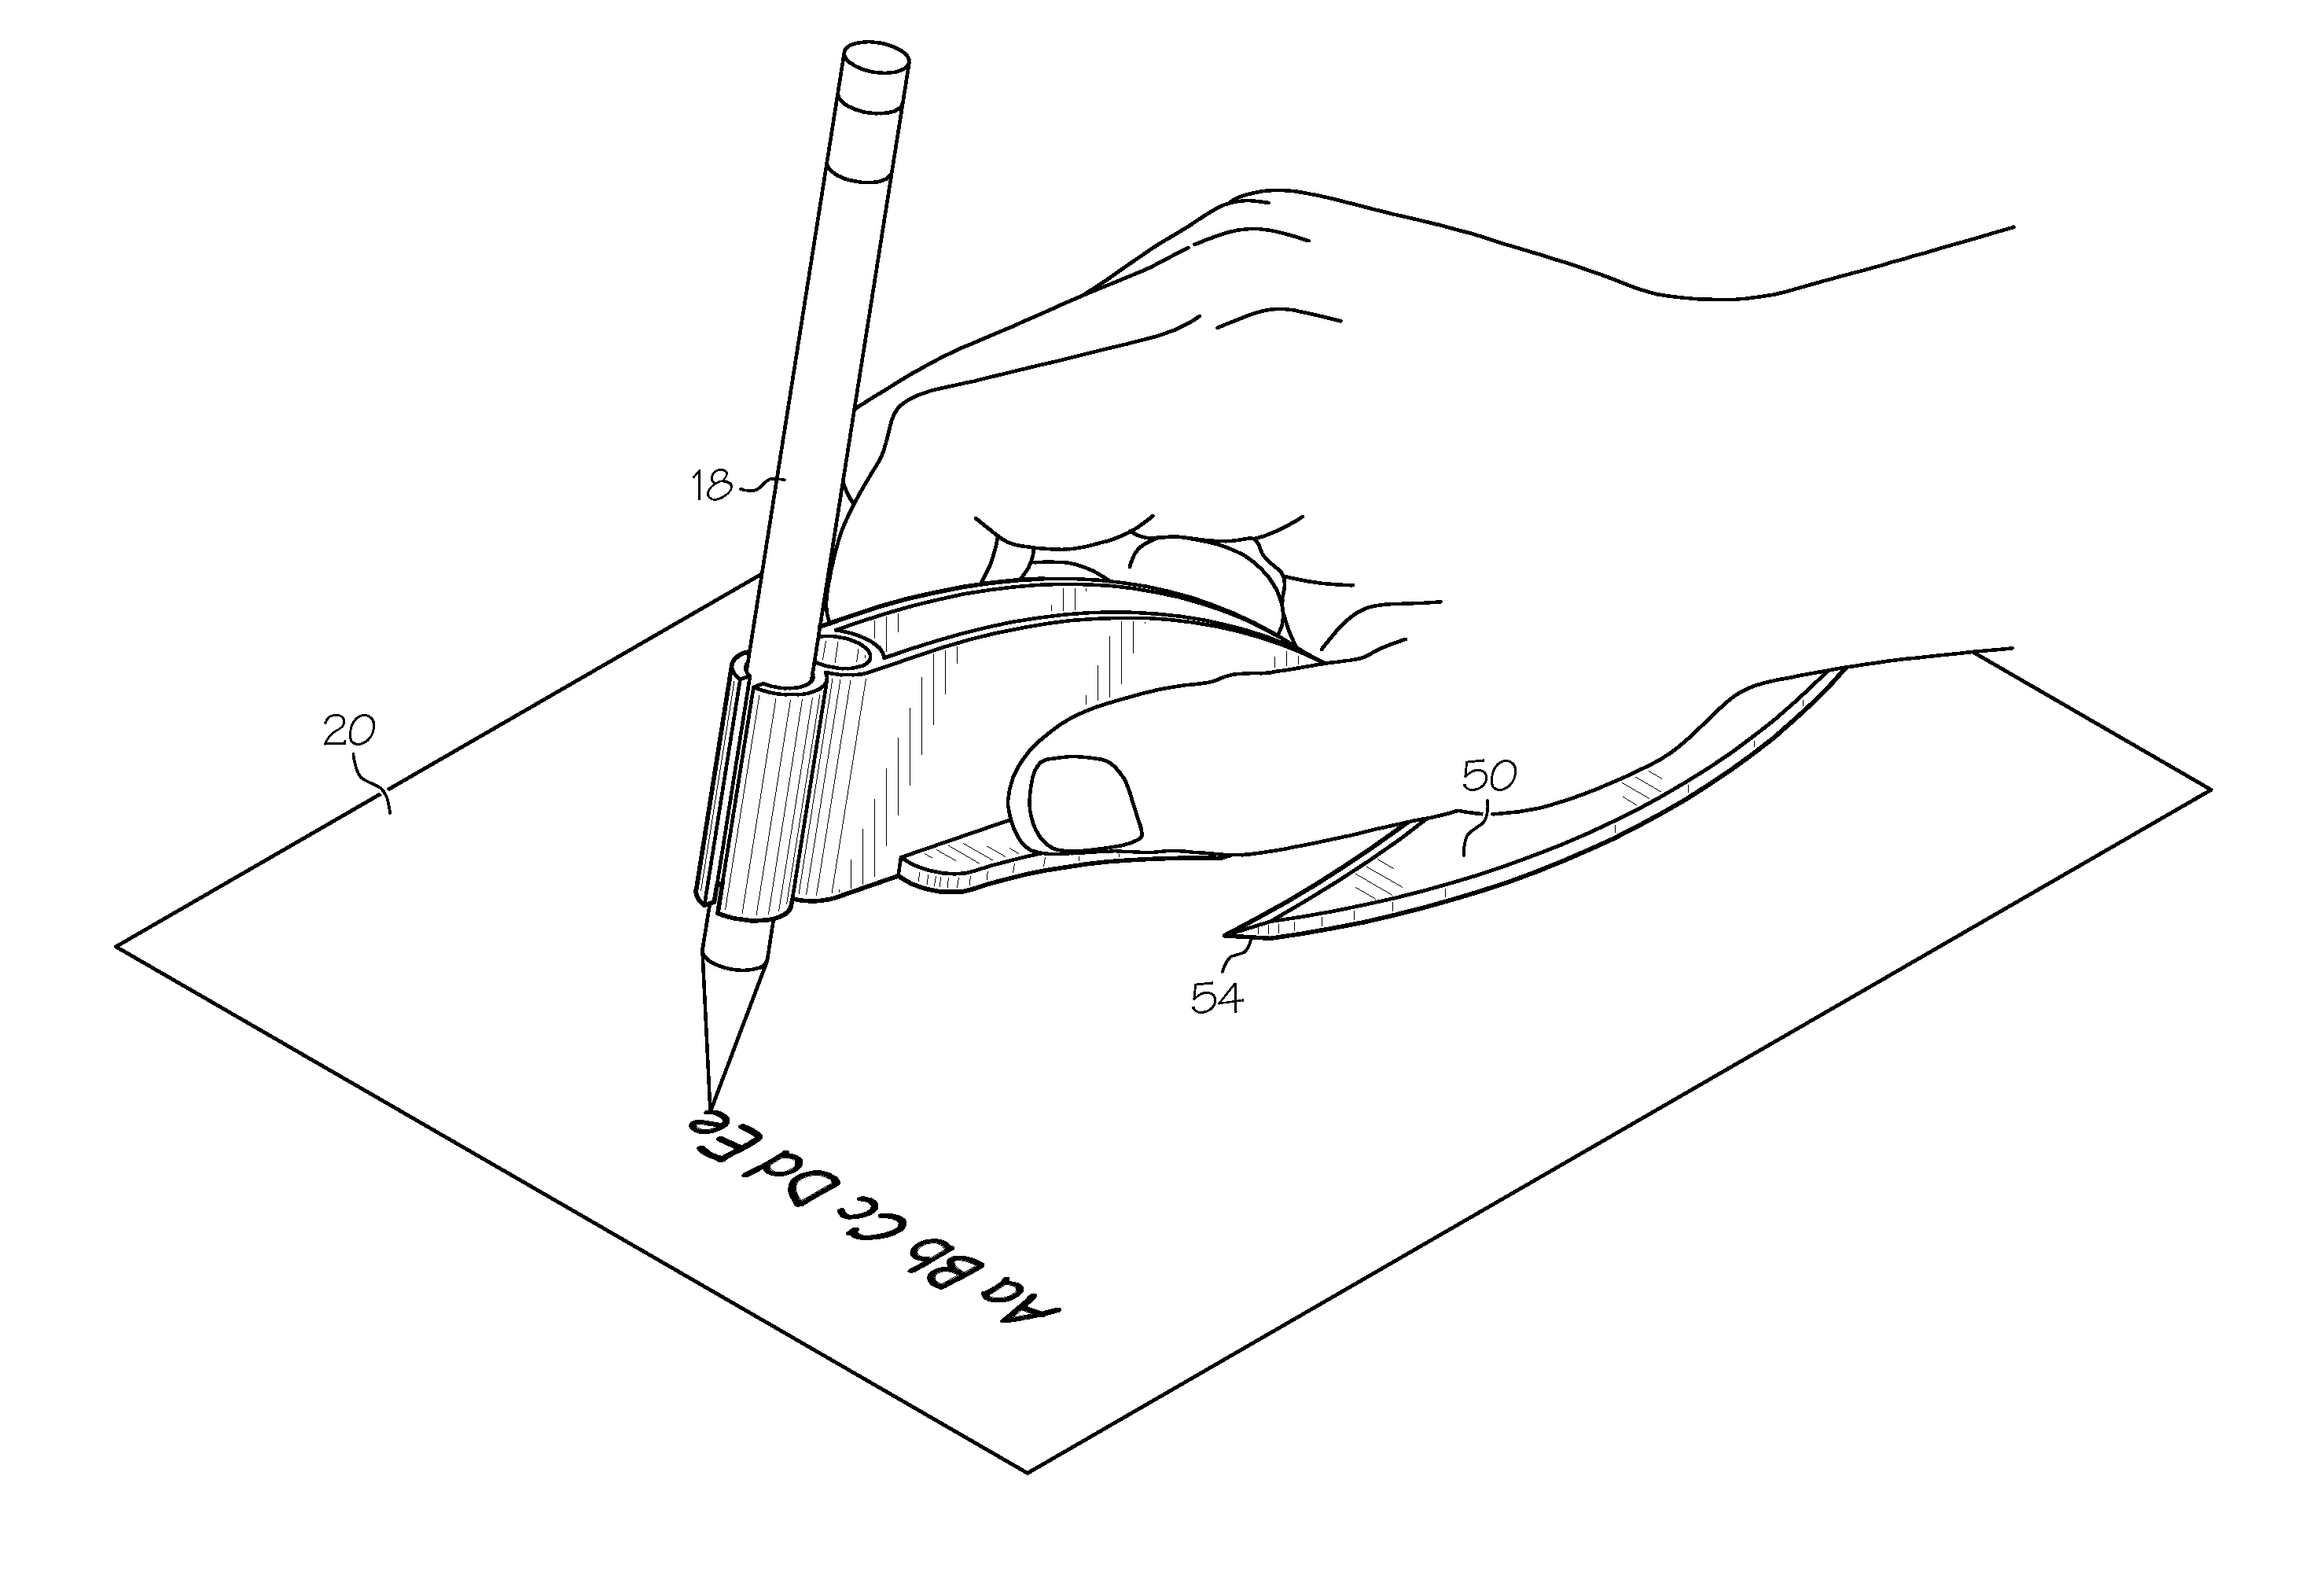 Writing Instrument Holder and Hand Support